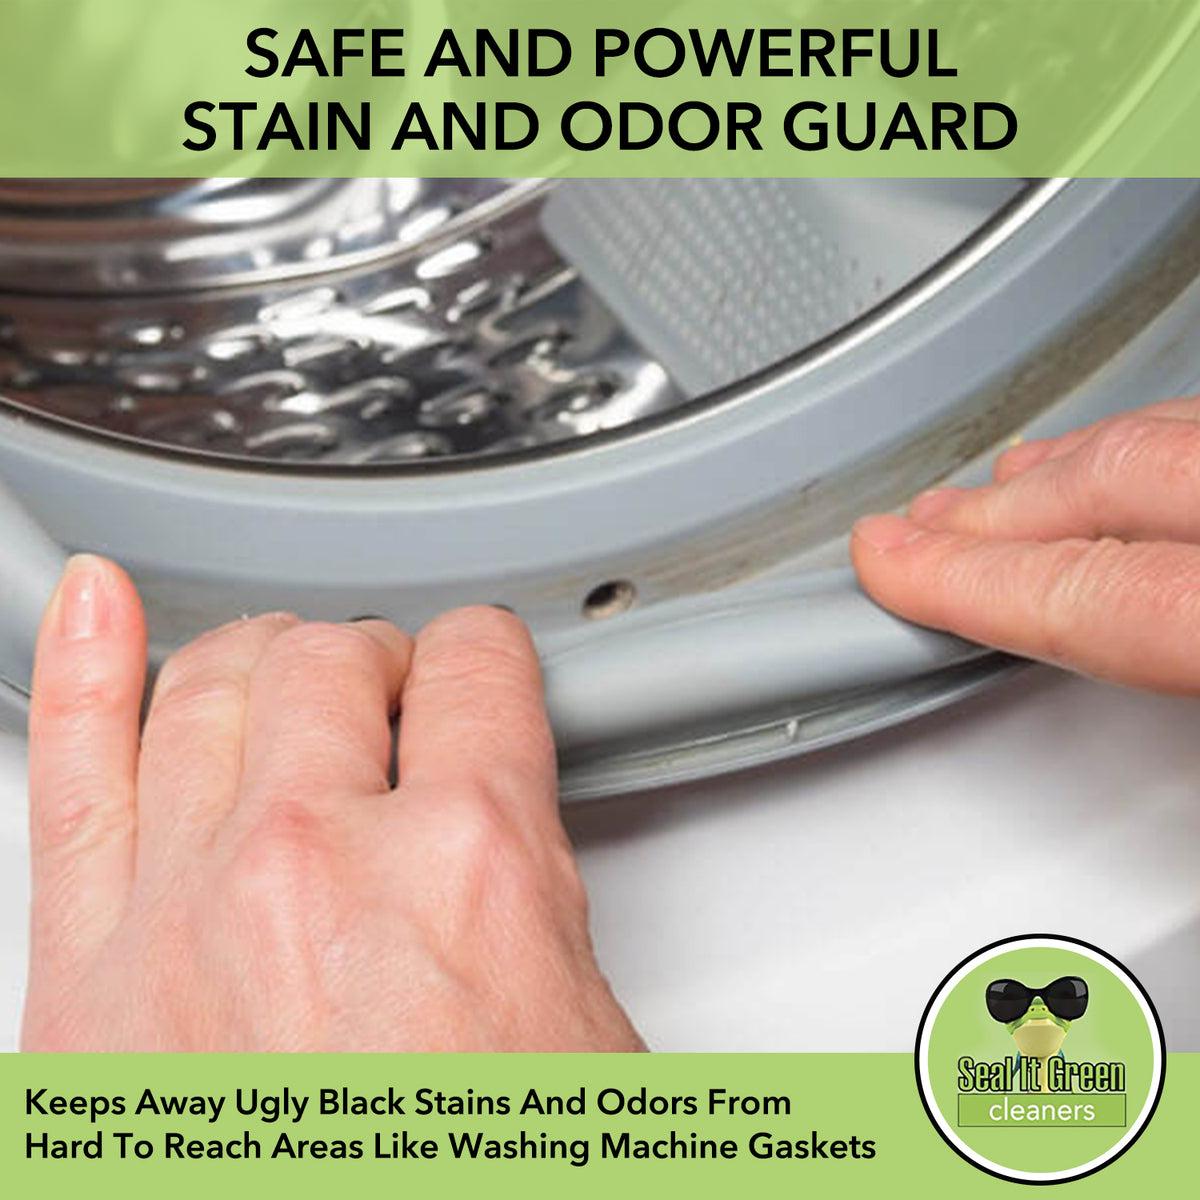 SAFE AND POWERFUL STAIN AND ODOR GUARD